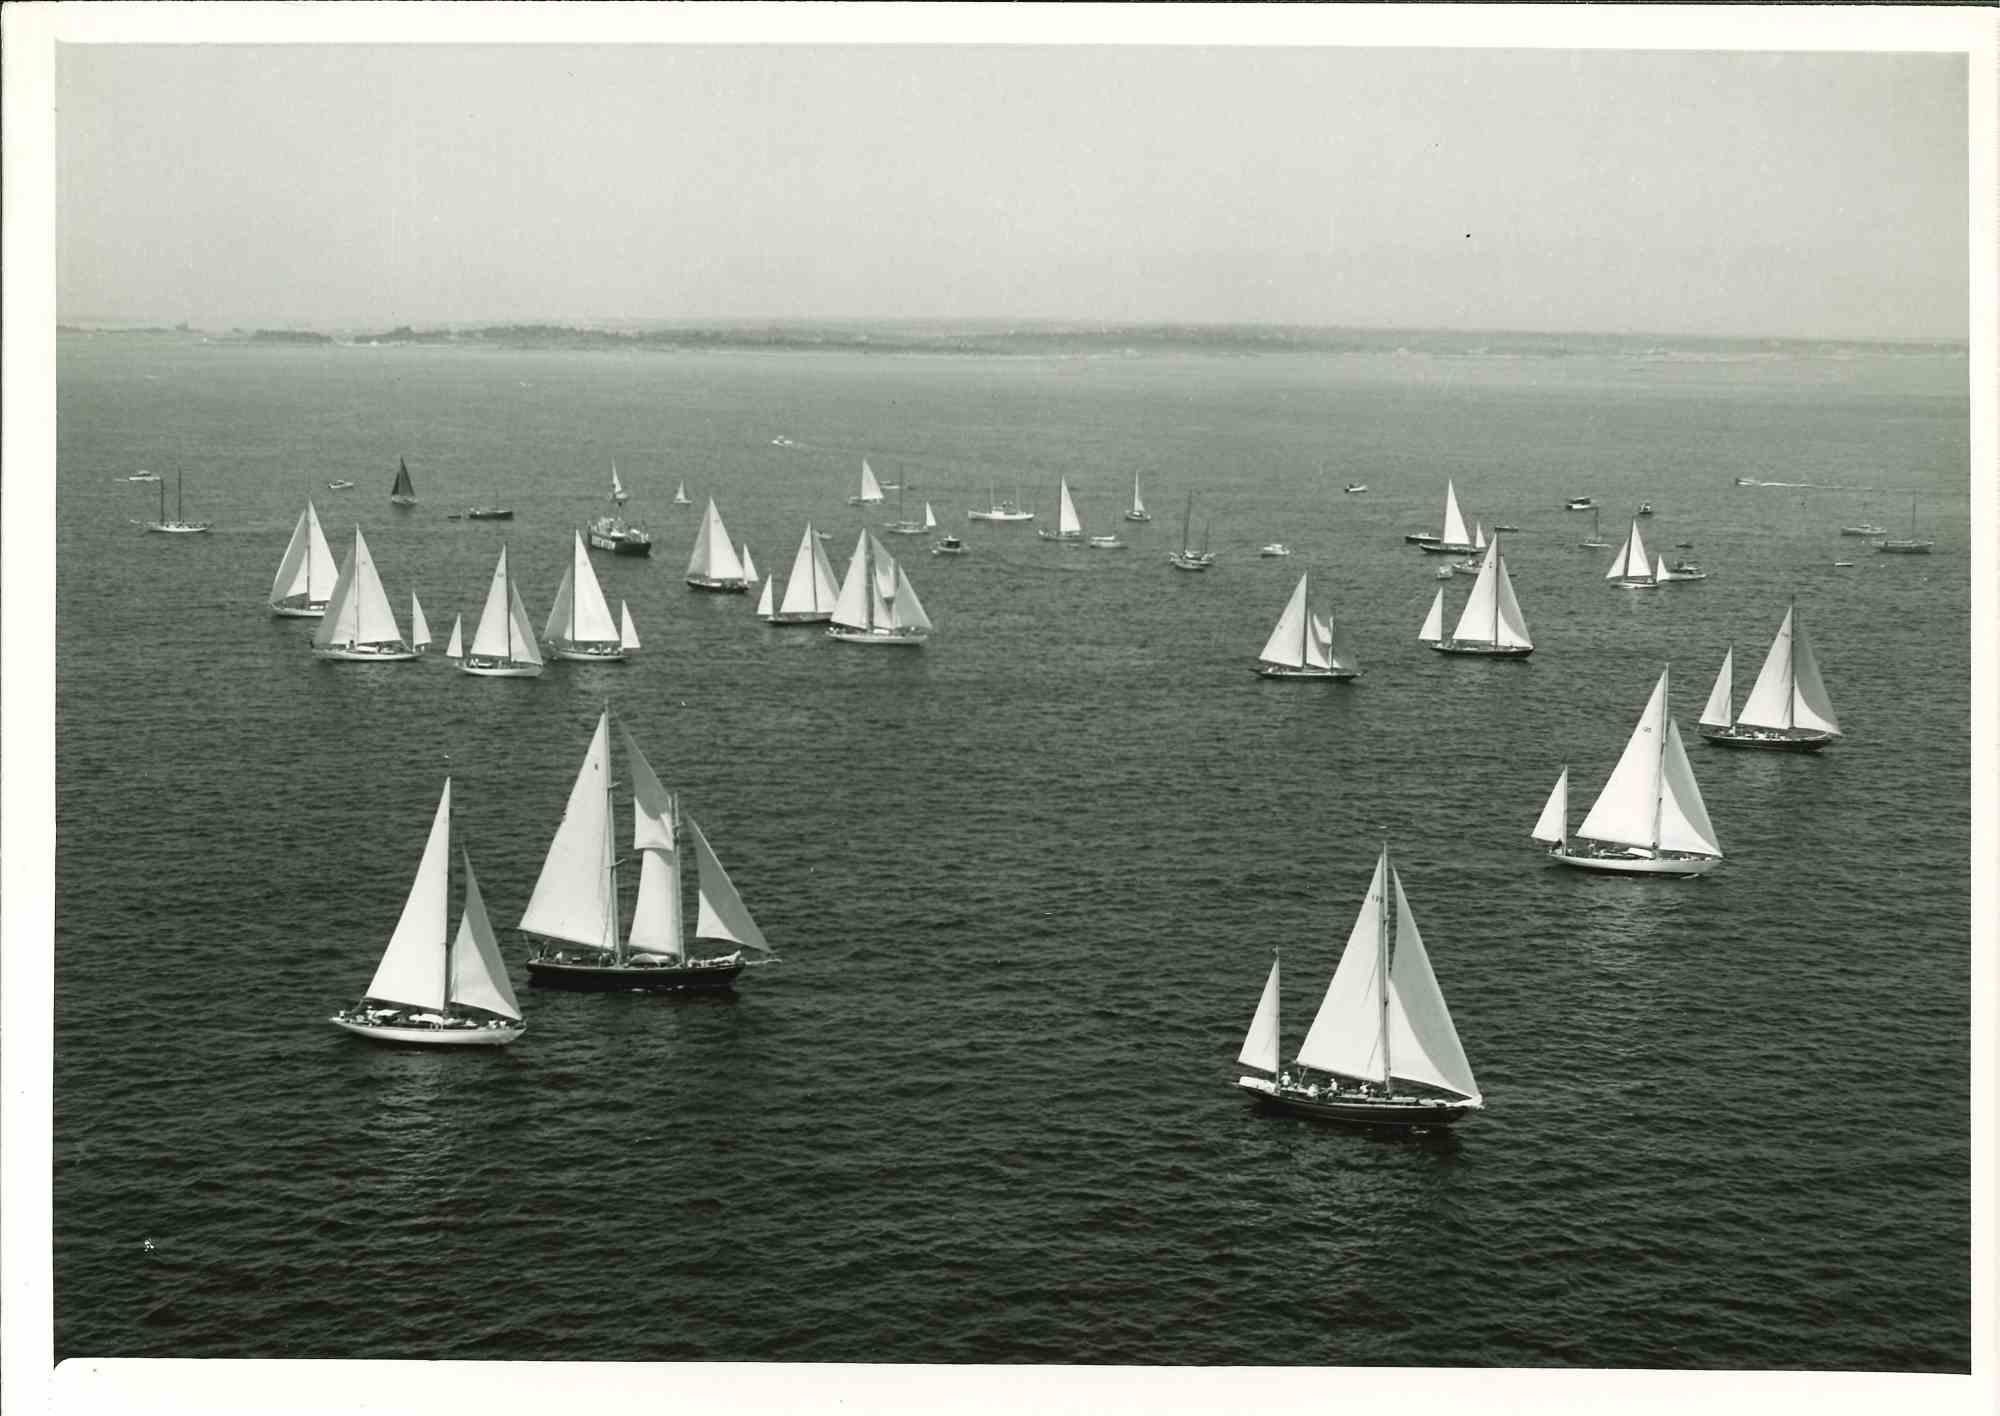 Unknown Figurative Photograph - Bermuda Race in High Point of U.S. - Vintage Photograph - Mid 20th Century